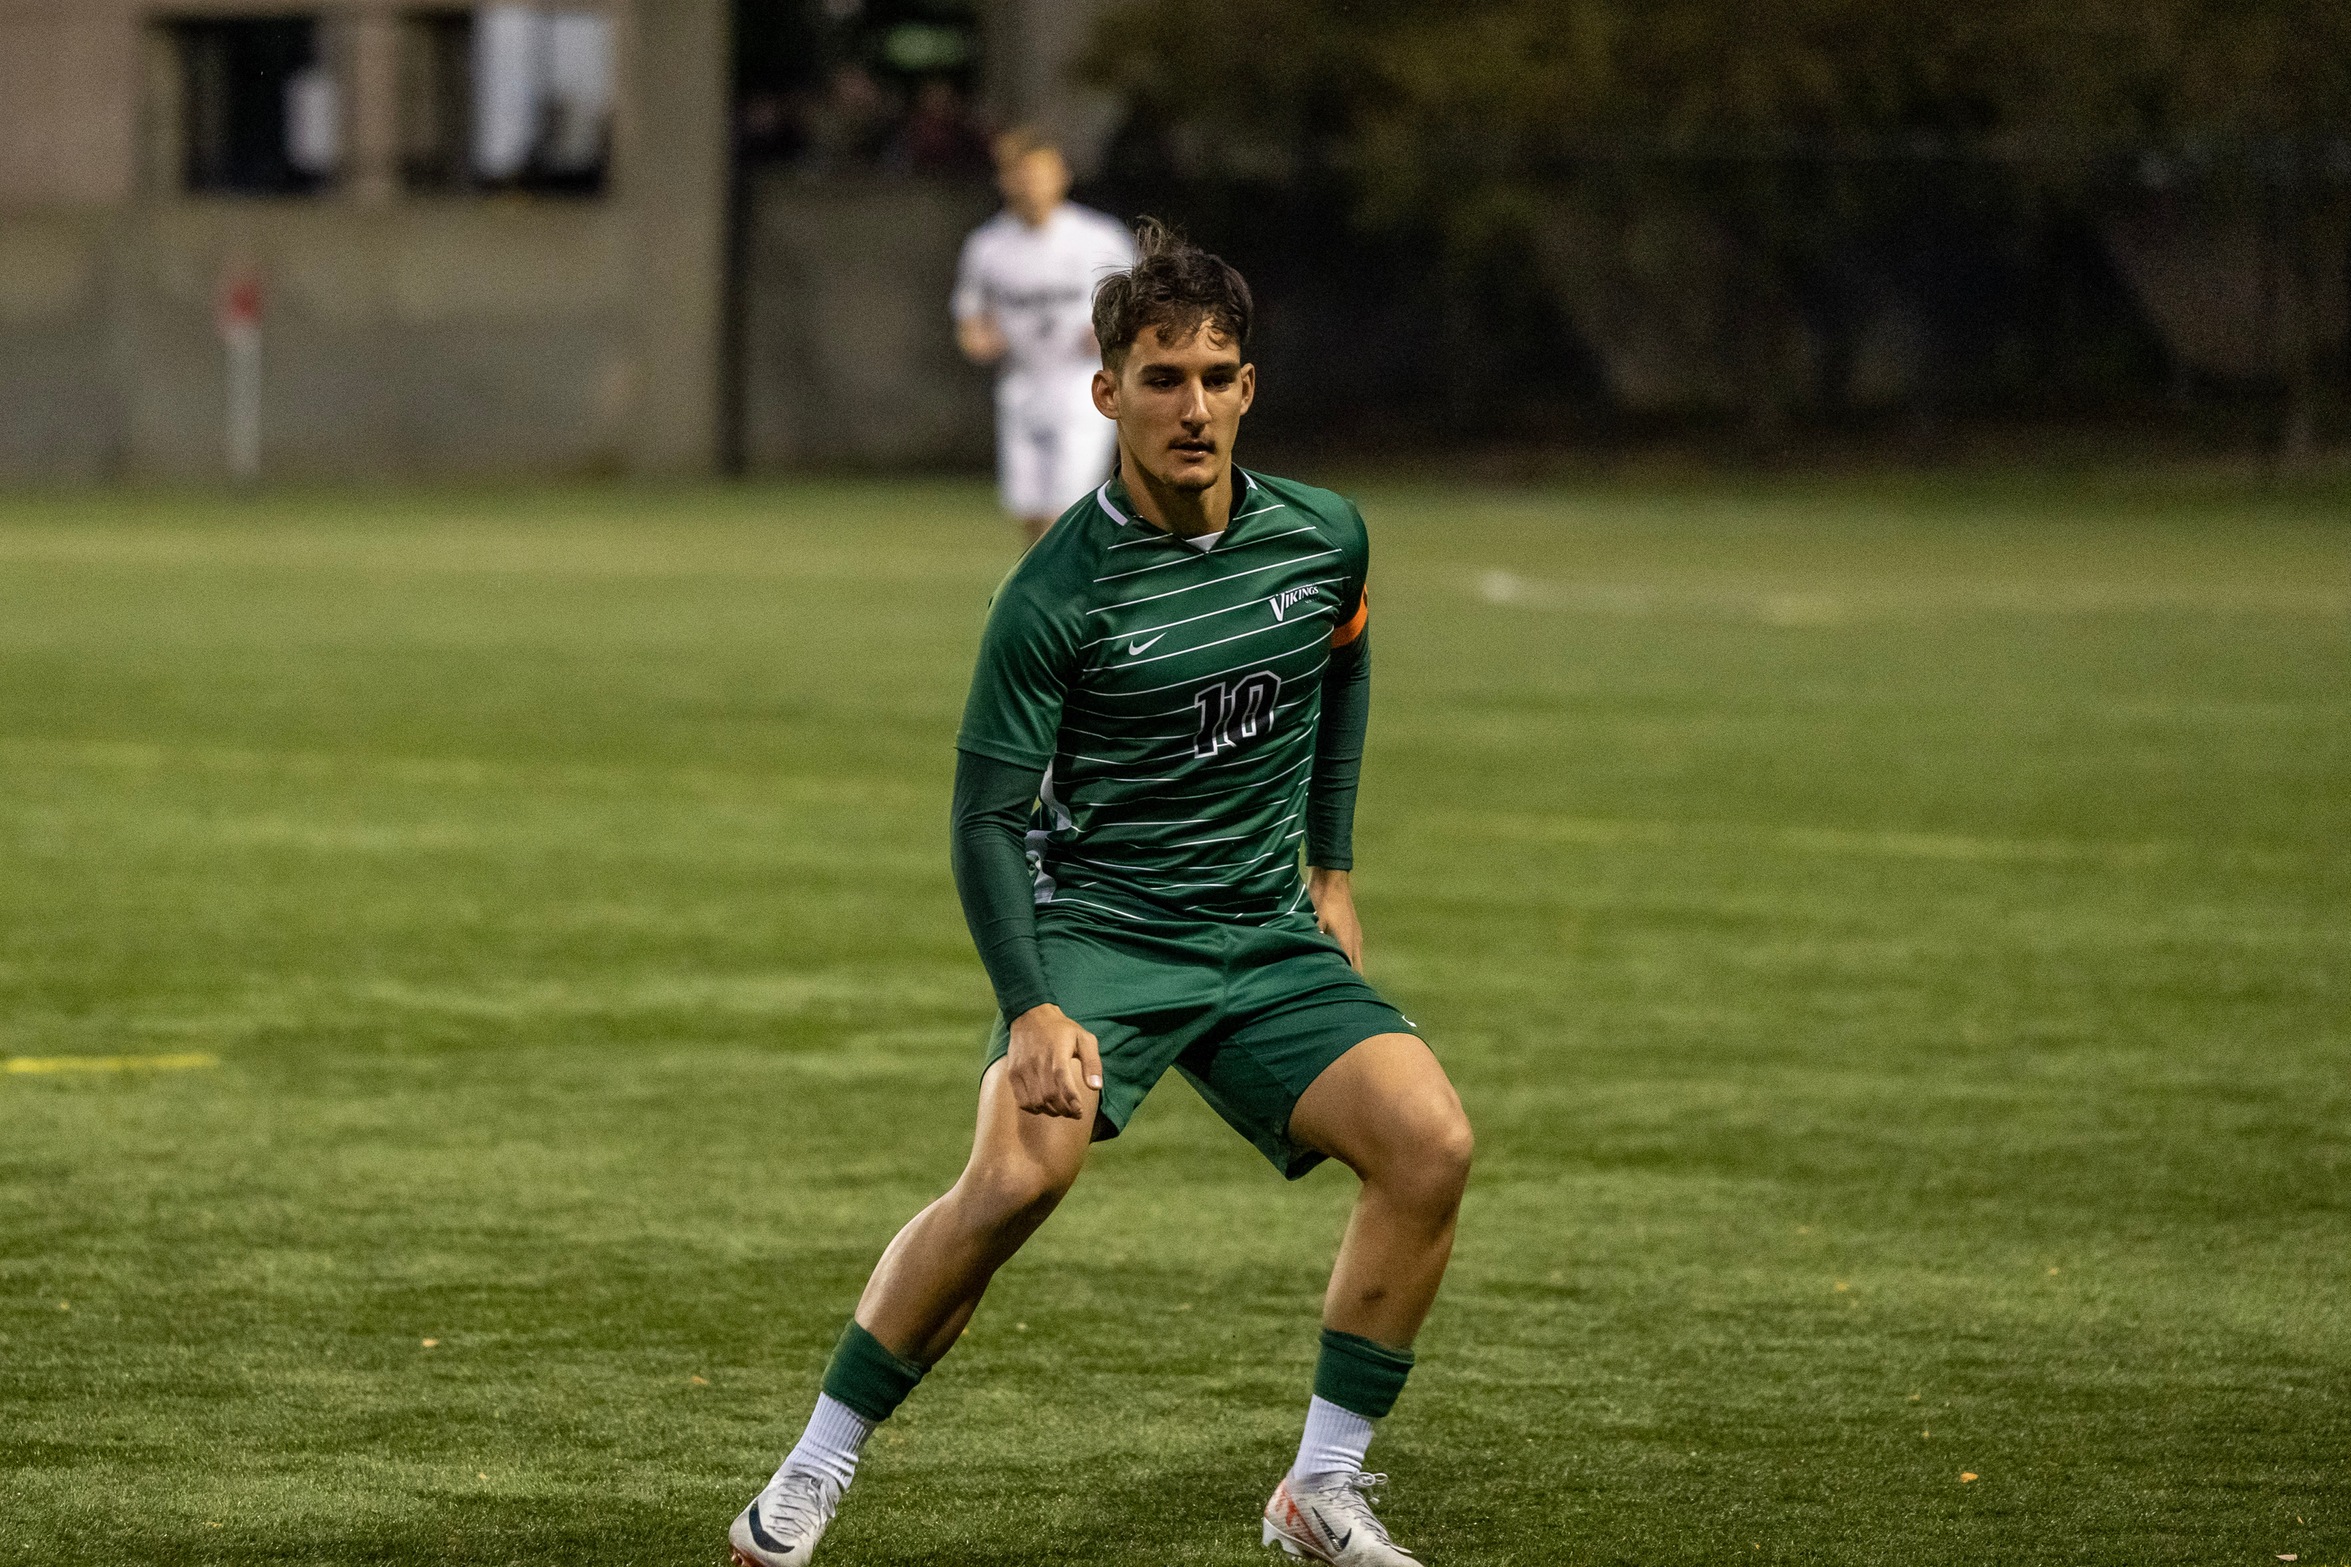 Cleveland State Men's Soccer Ties Purdue Fort Wayne on the Road, 2-2